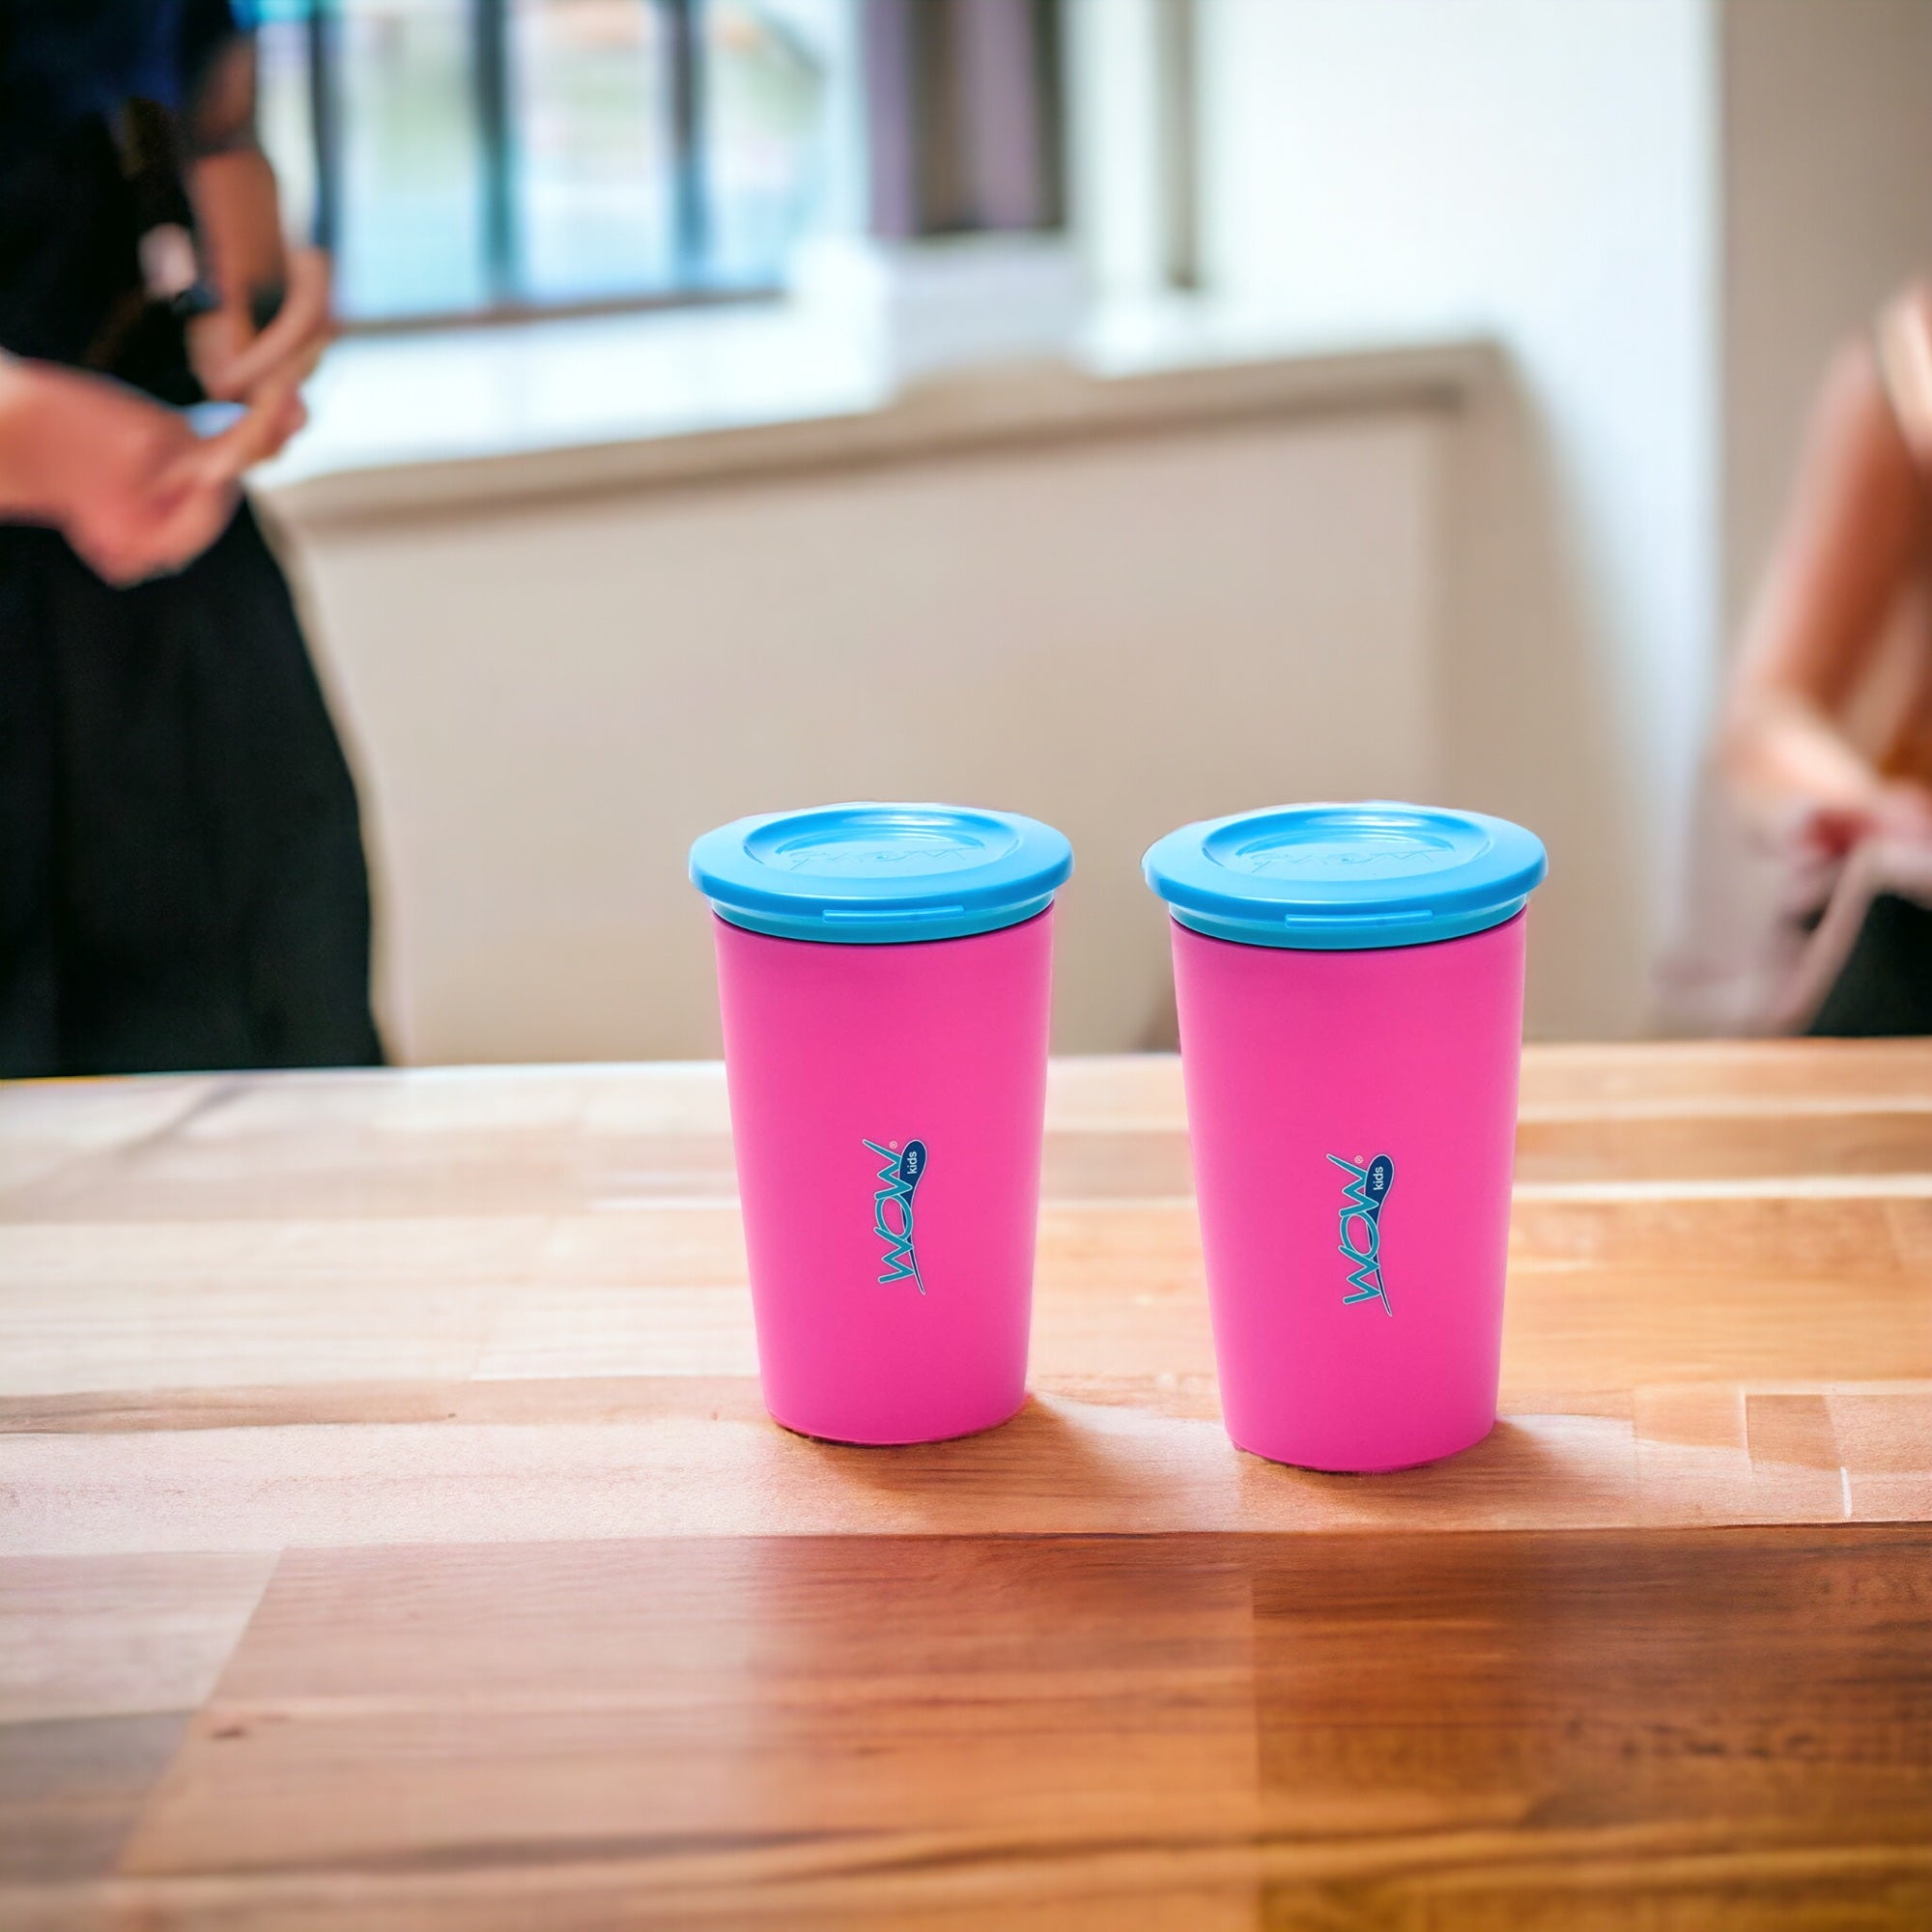  Snackeez! Snack 'N Drink In One Cup (Pink and Blue - Set of 2)  : Baby